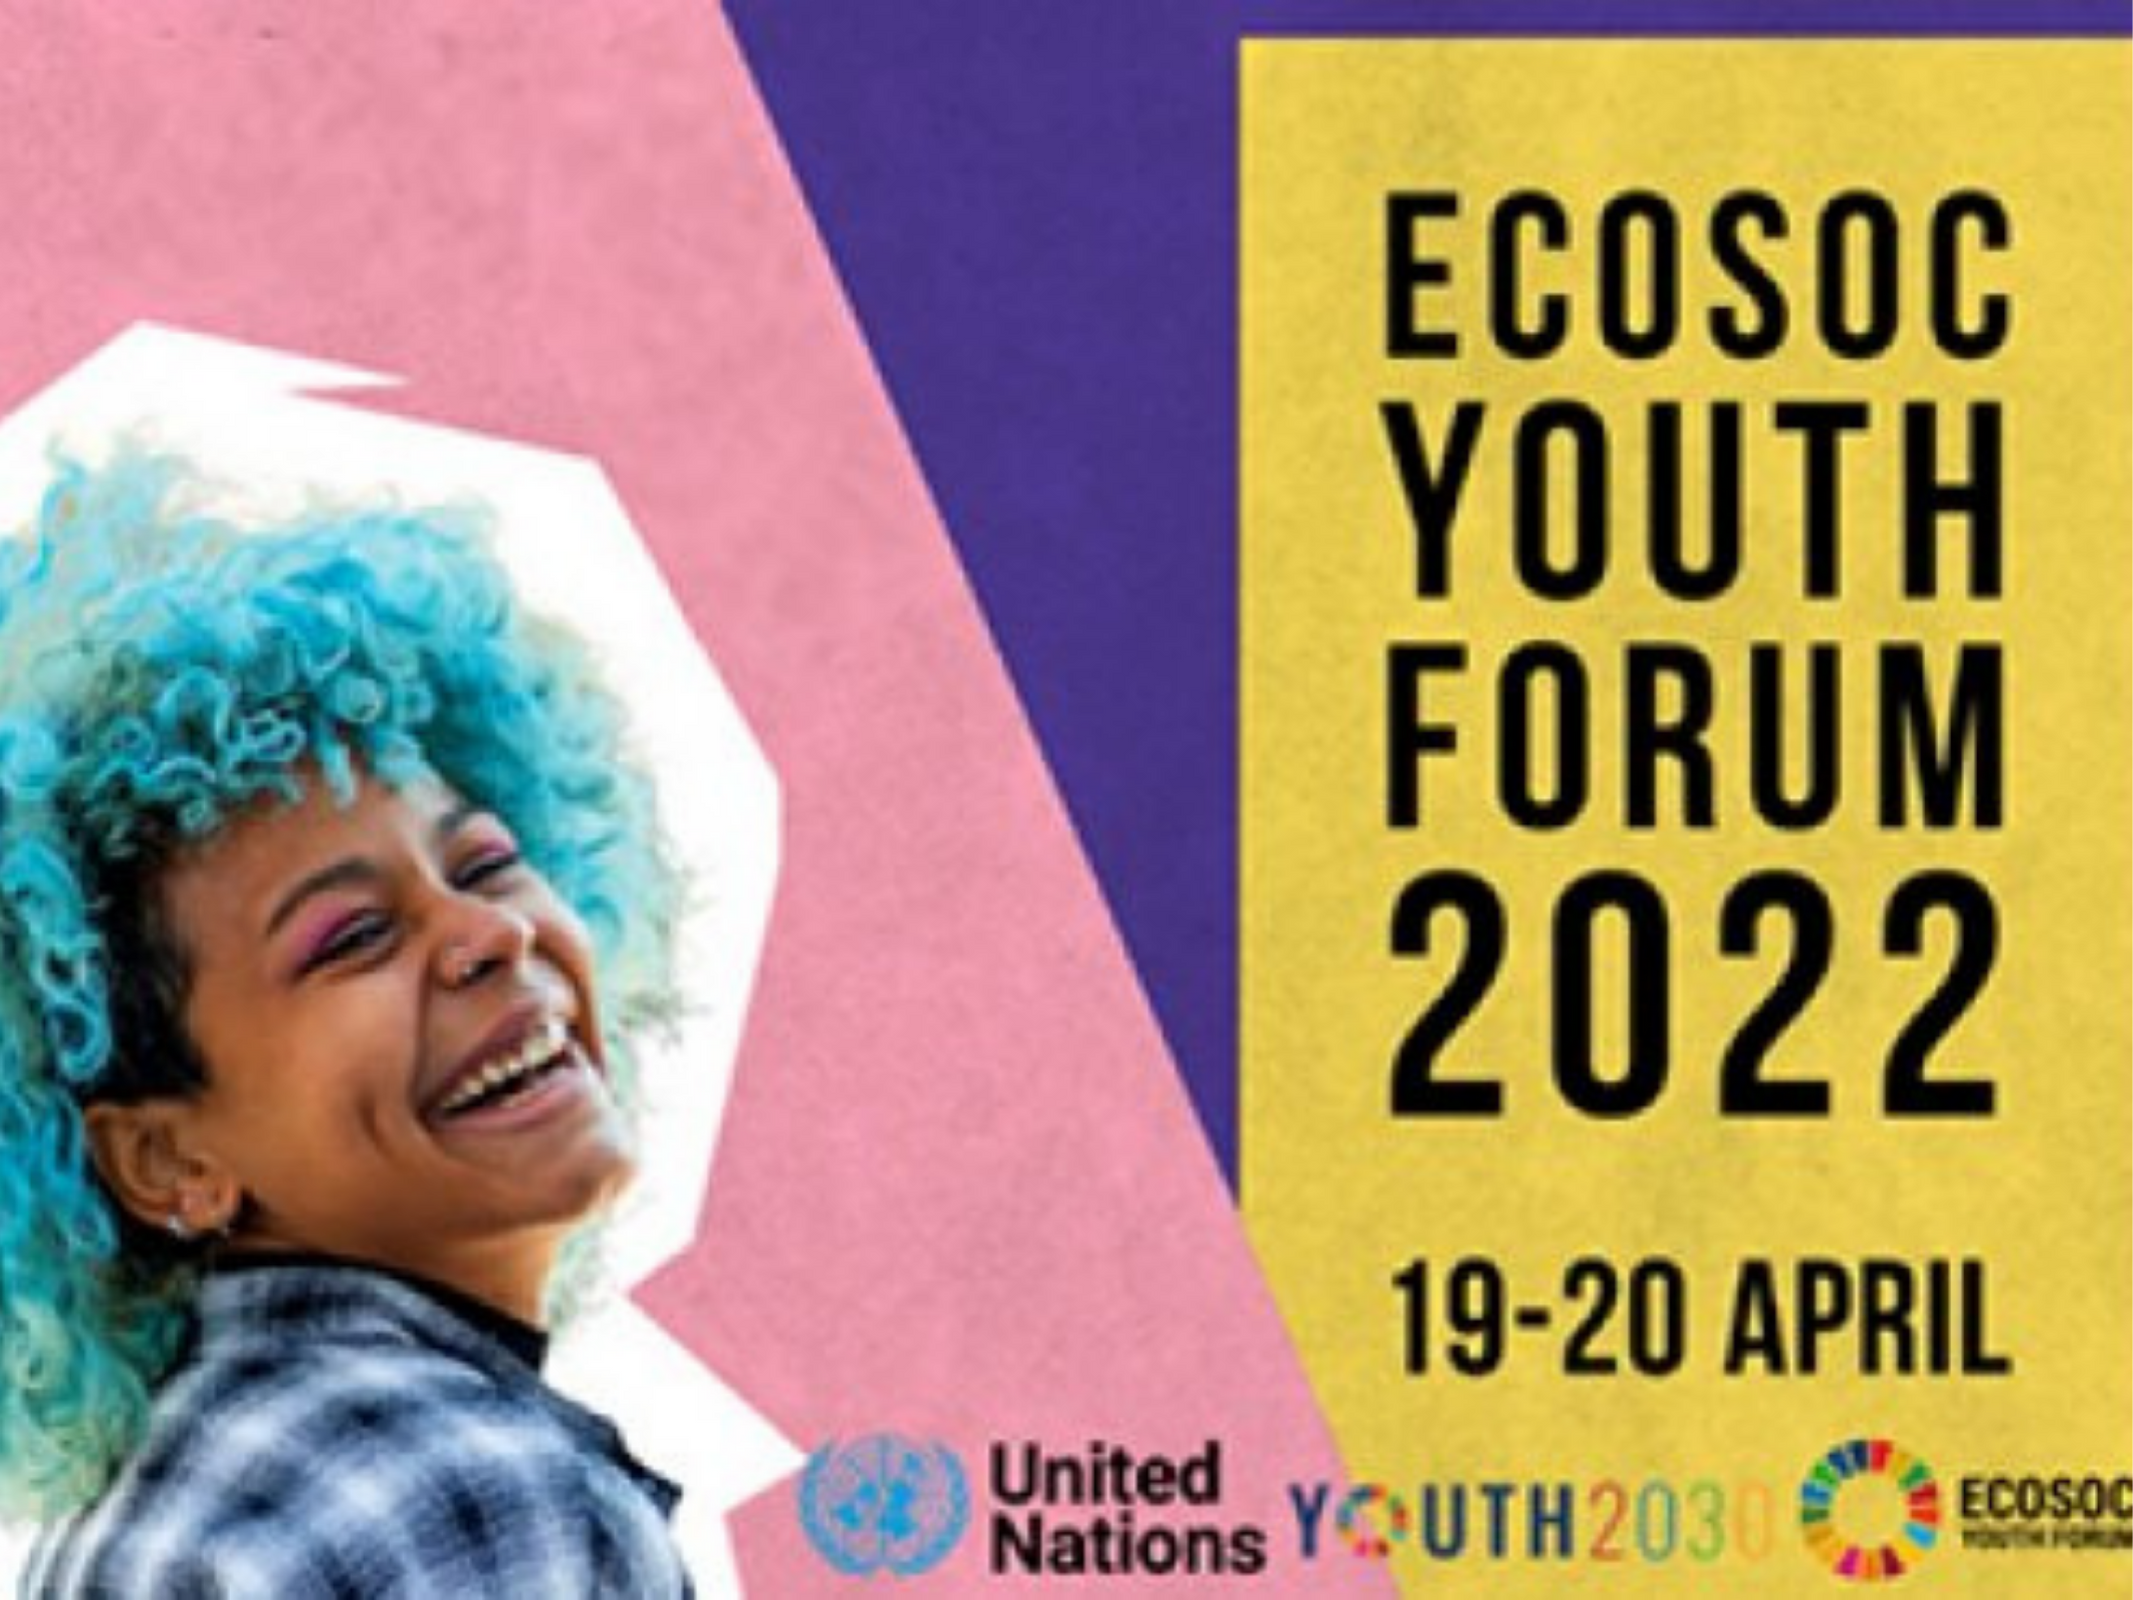 Economic and Social Council (ECOSOC) Youth Forum